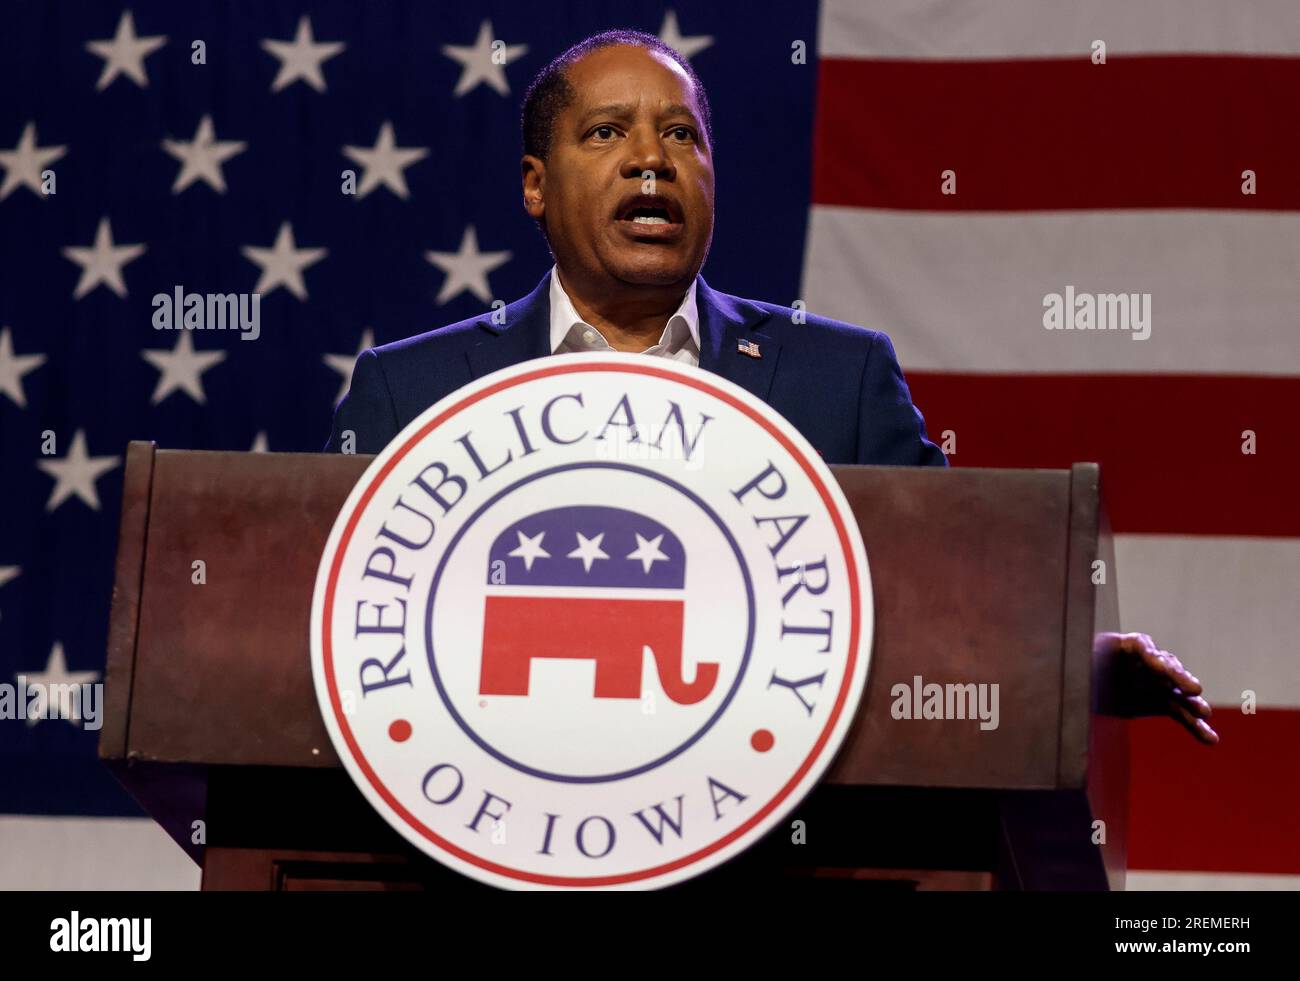 Des Moines, USA. 28th July, 2023. Republican presidential candidate Larry Elder speaks at the 2023 Republican Party of Iowa Lincoln Dinner in Des Moines, Iowa, Friday, July 28 2023. Republican candidates for US President made pitches for their respective candidacies at the gathering in Iowa which will hold the First-in-the-Nation Caucus. Photo by Tannen Maury/UPI Credit: UPI/Alamy Live News Stock Photo